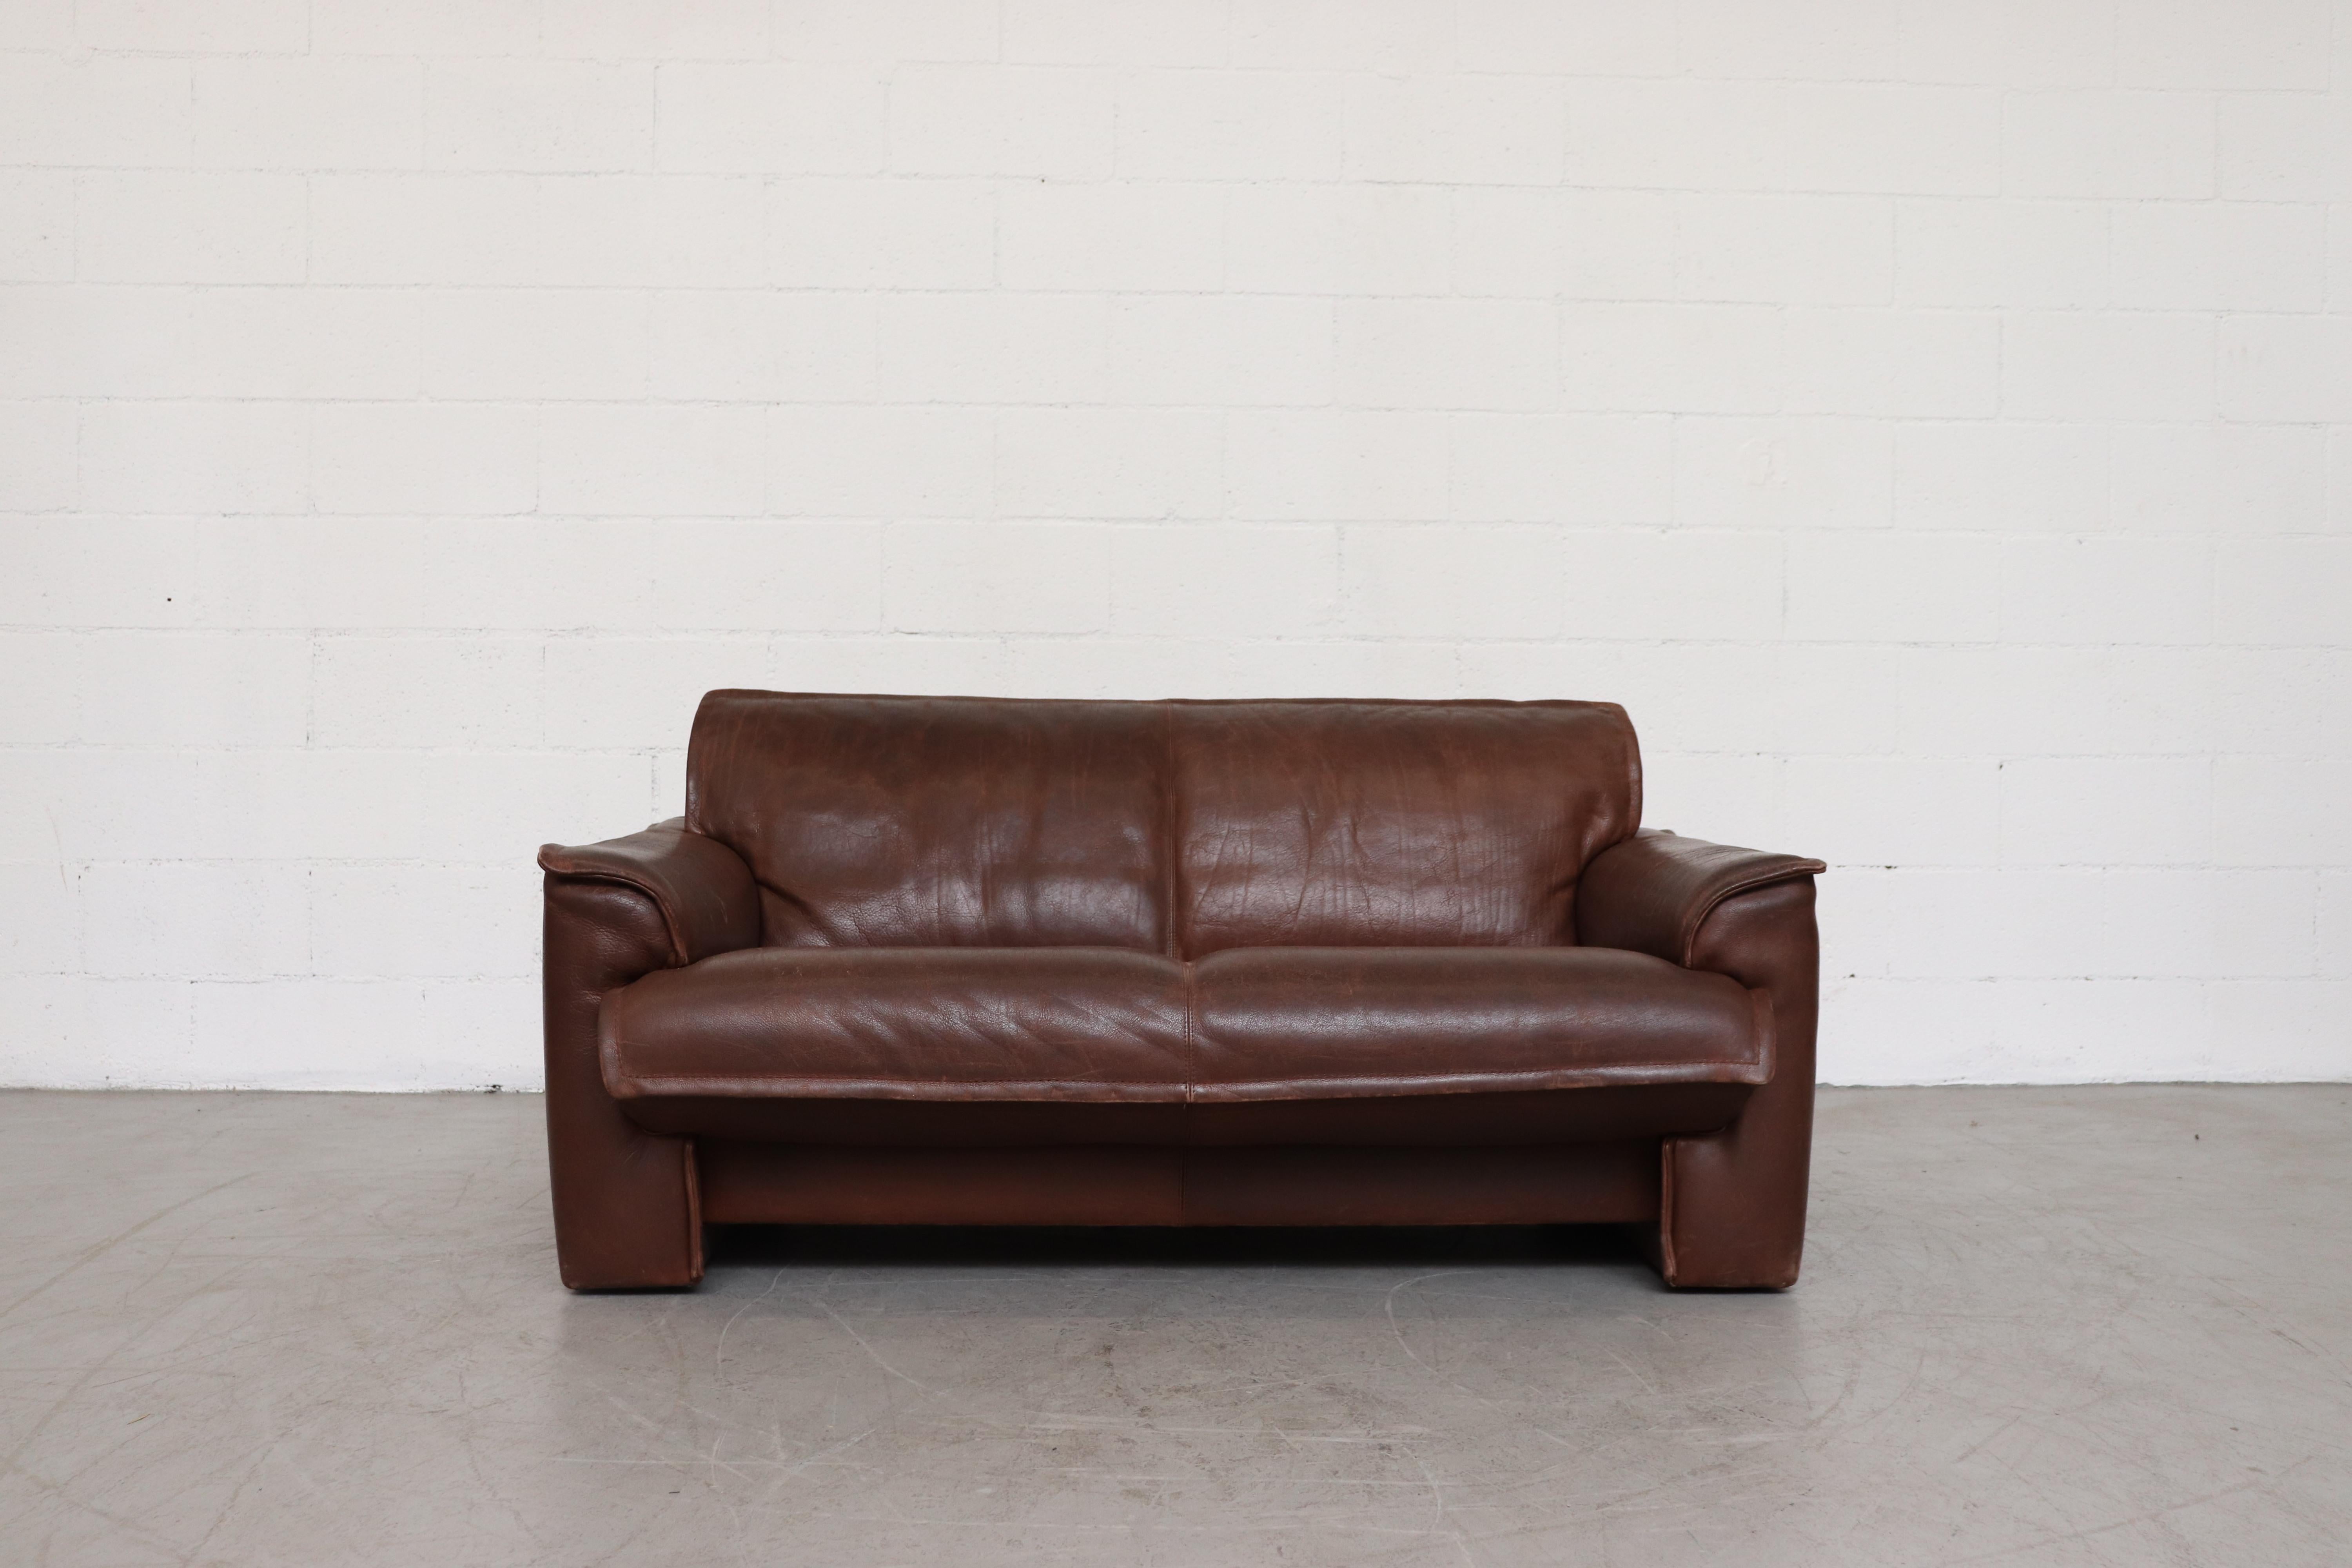 Leolux buffalo leather love seat with heavy patina. In original condition with visible signs of wear. Wear is consistent with its age and usage. A similar slightly lighter love seat is available, listed separately. In original condition with some